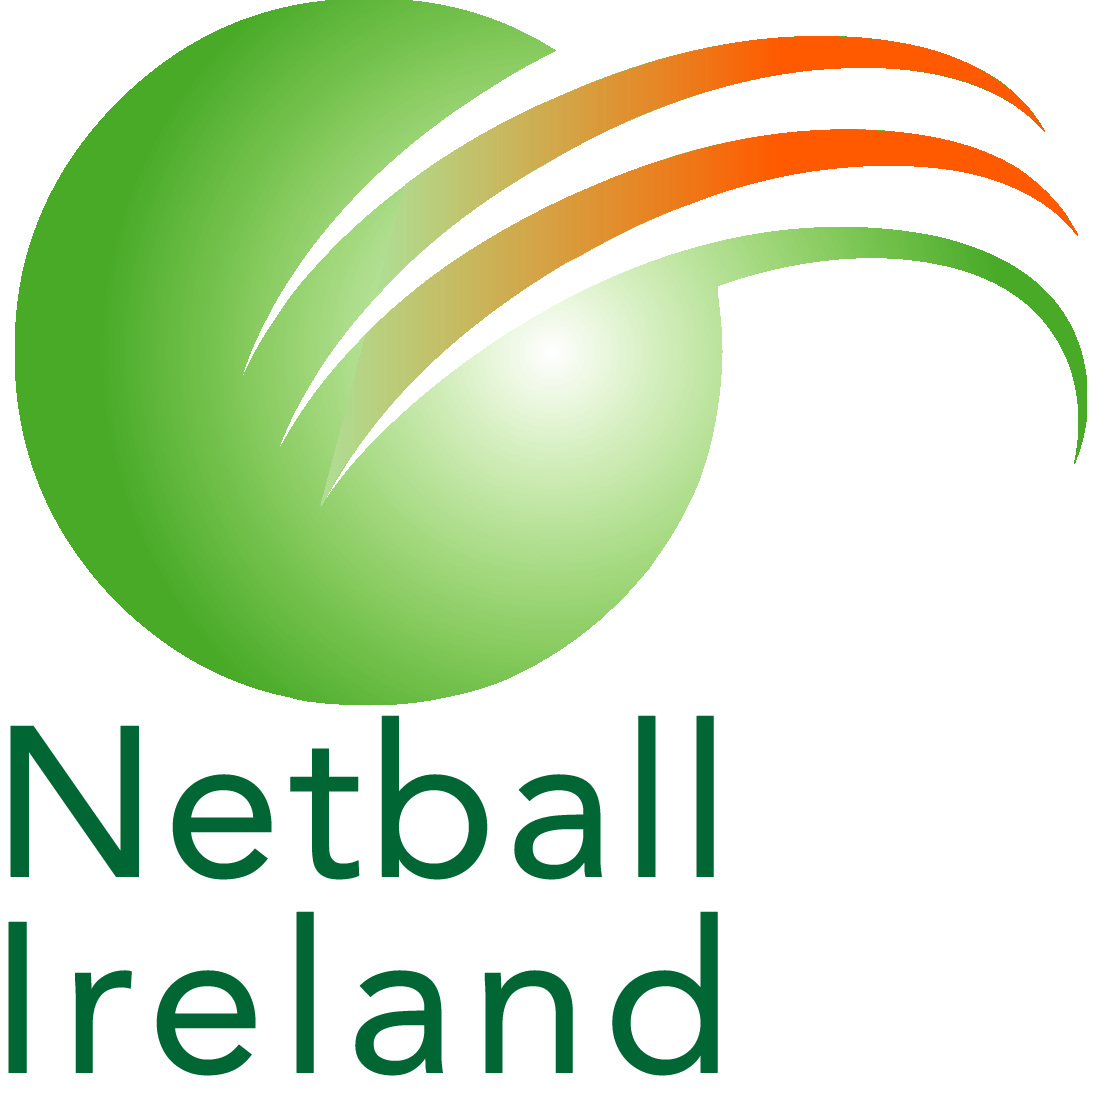 Welcome to the official page for Netball Ireland, lovers of Netball! Tweets by our Press Officer(s) #netballireland #womeninsport #COYGIG #netball